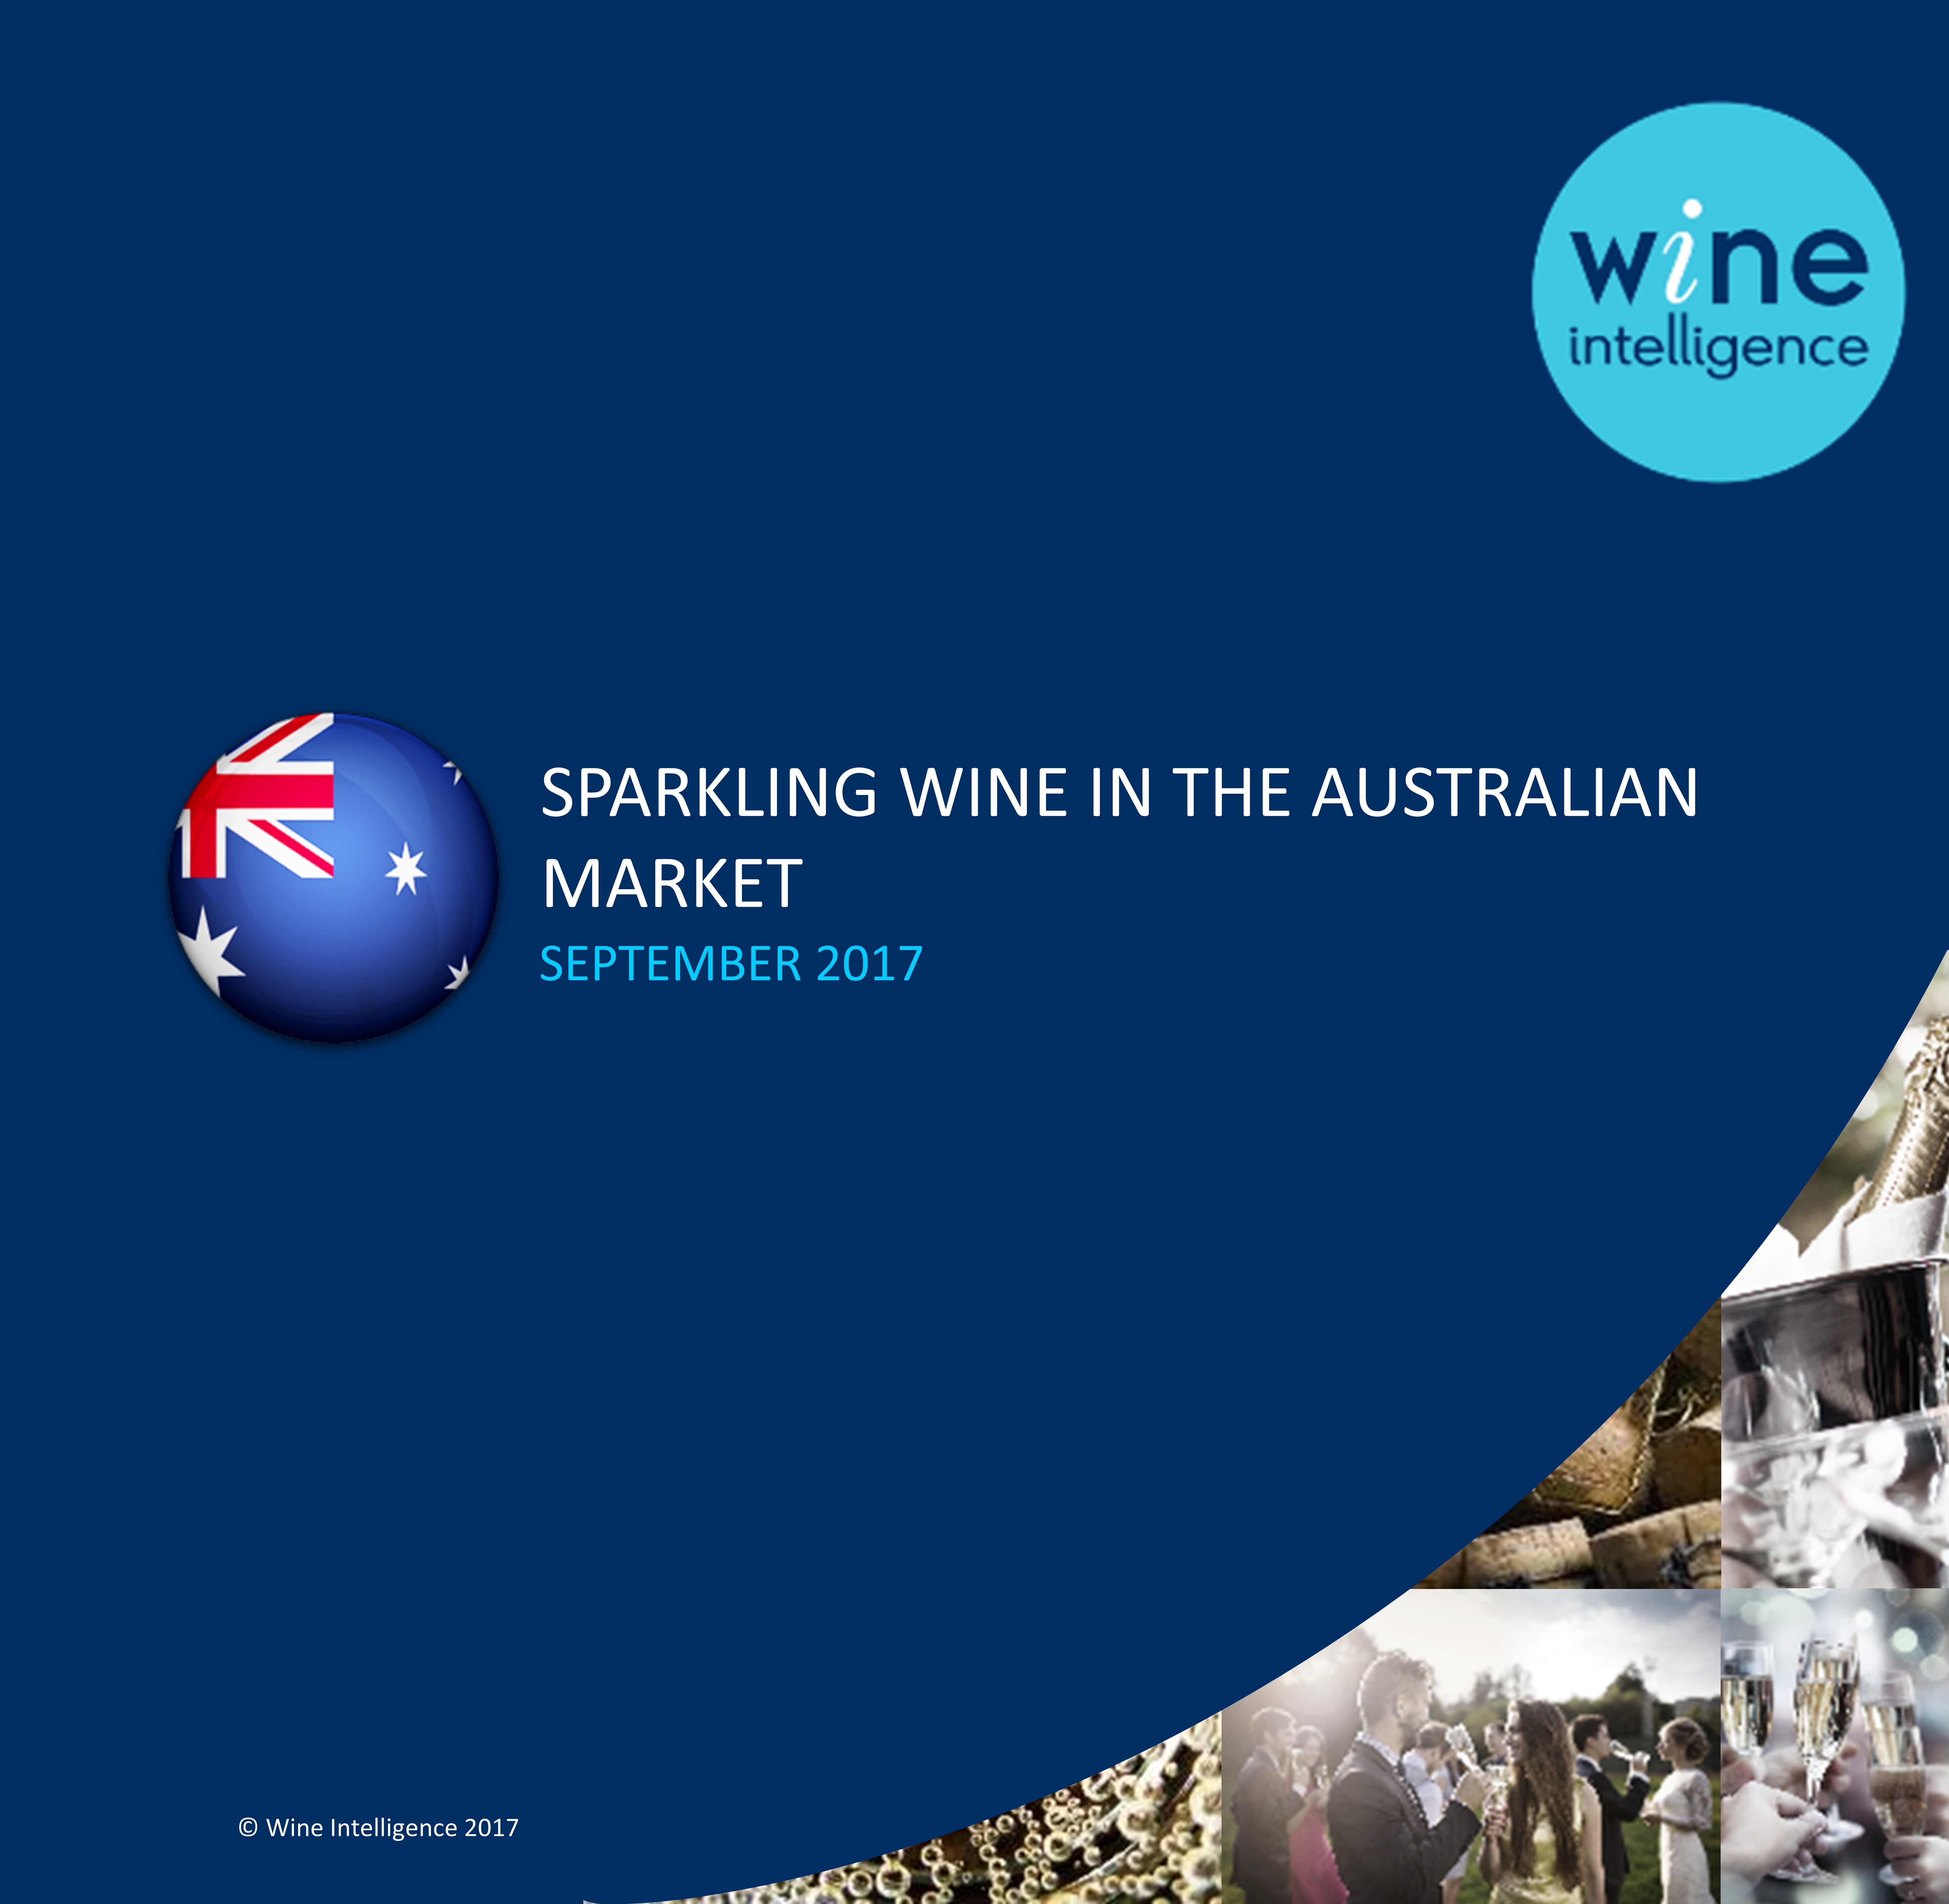 Sparkling wine in the Australian market 2017 - Press Release: Wine Intelligence launches Spanish office headed by Director Juan Park